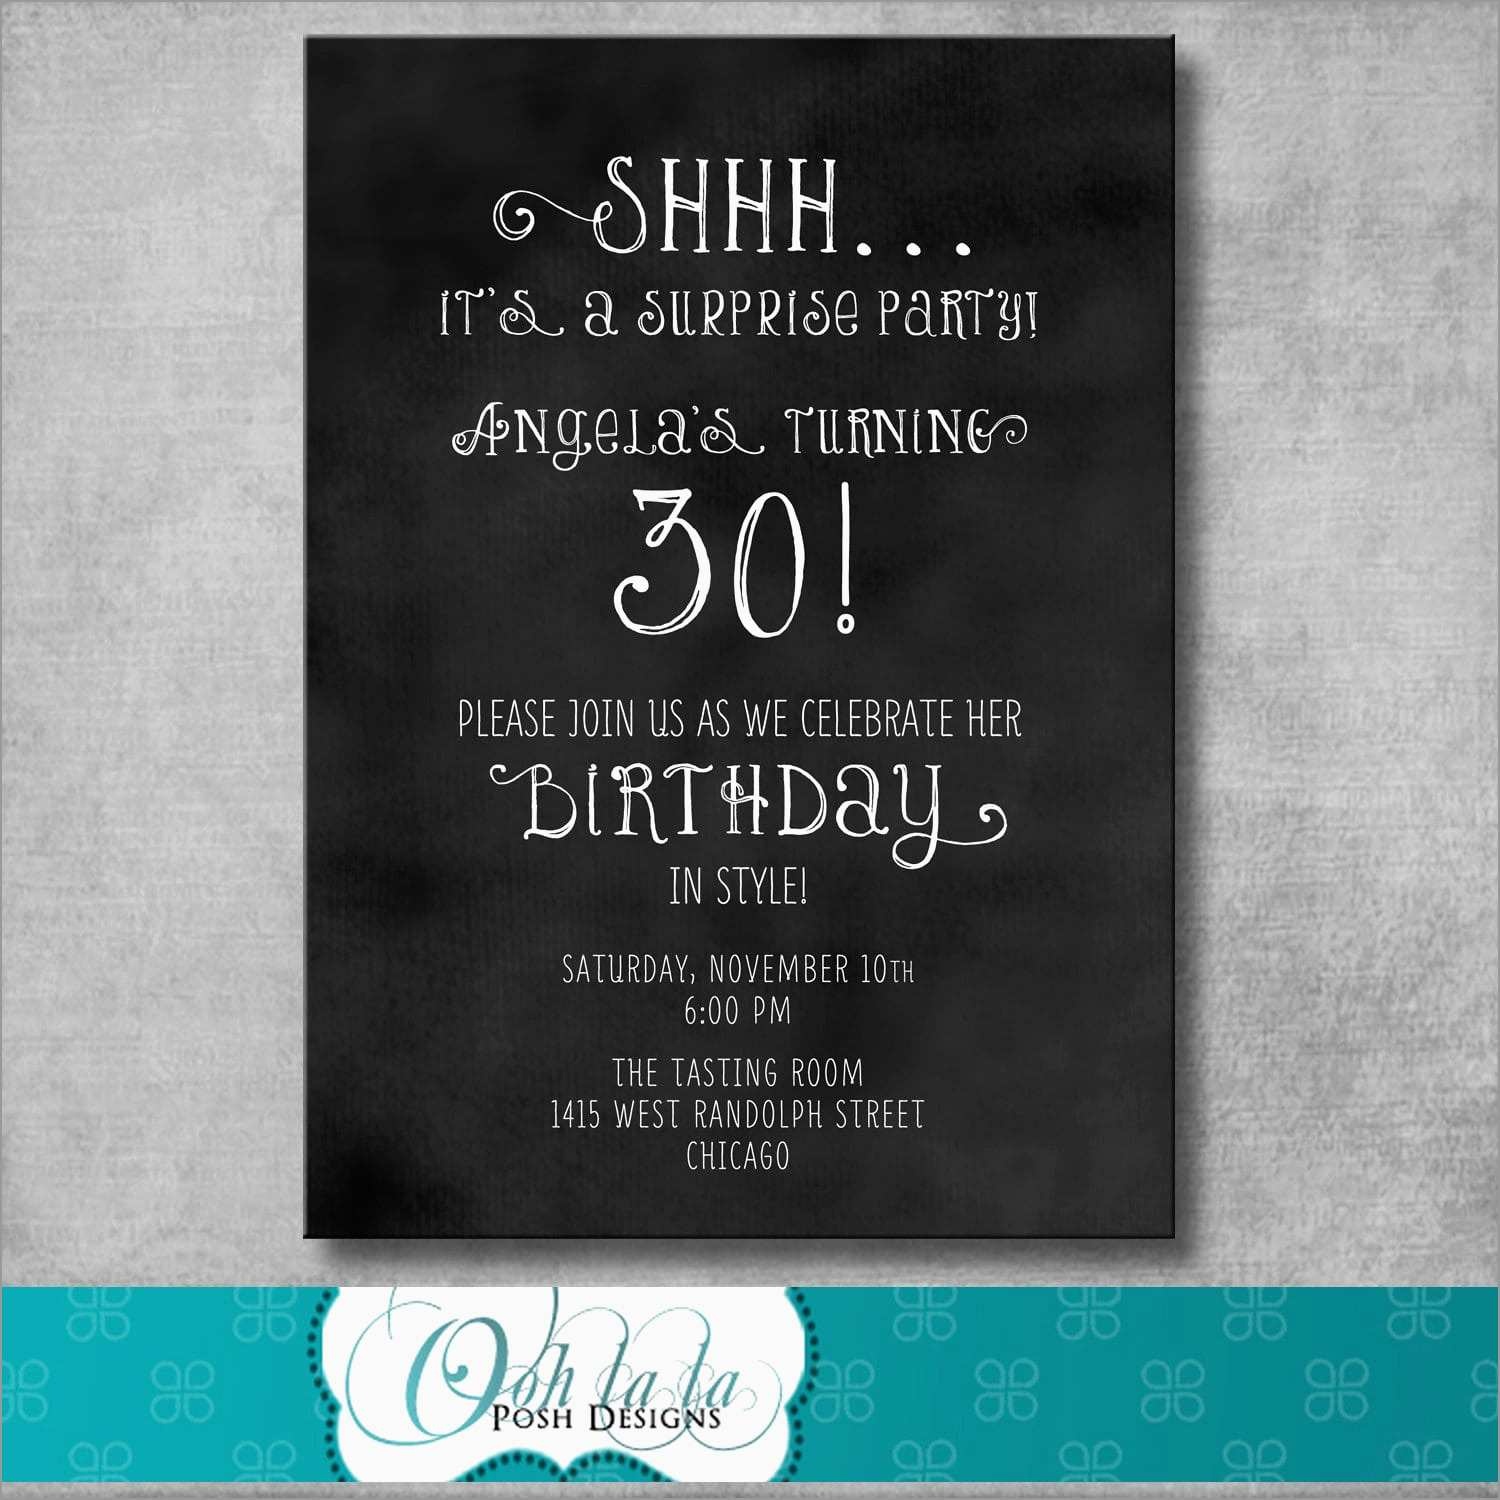 Awesome Surprise Invitation Templates Free | Best Of Template - Free Printable Surprise Party Invitation Templates